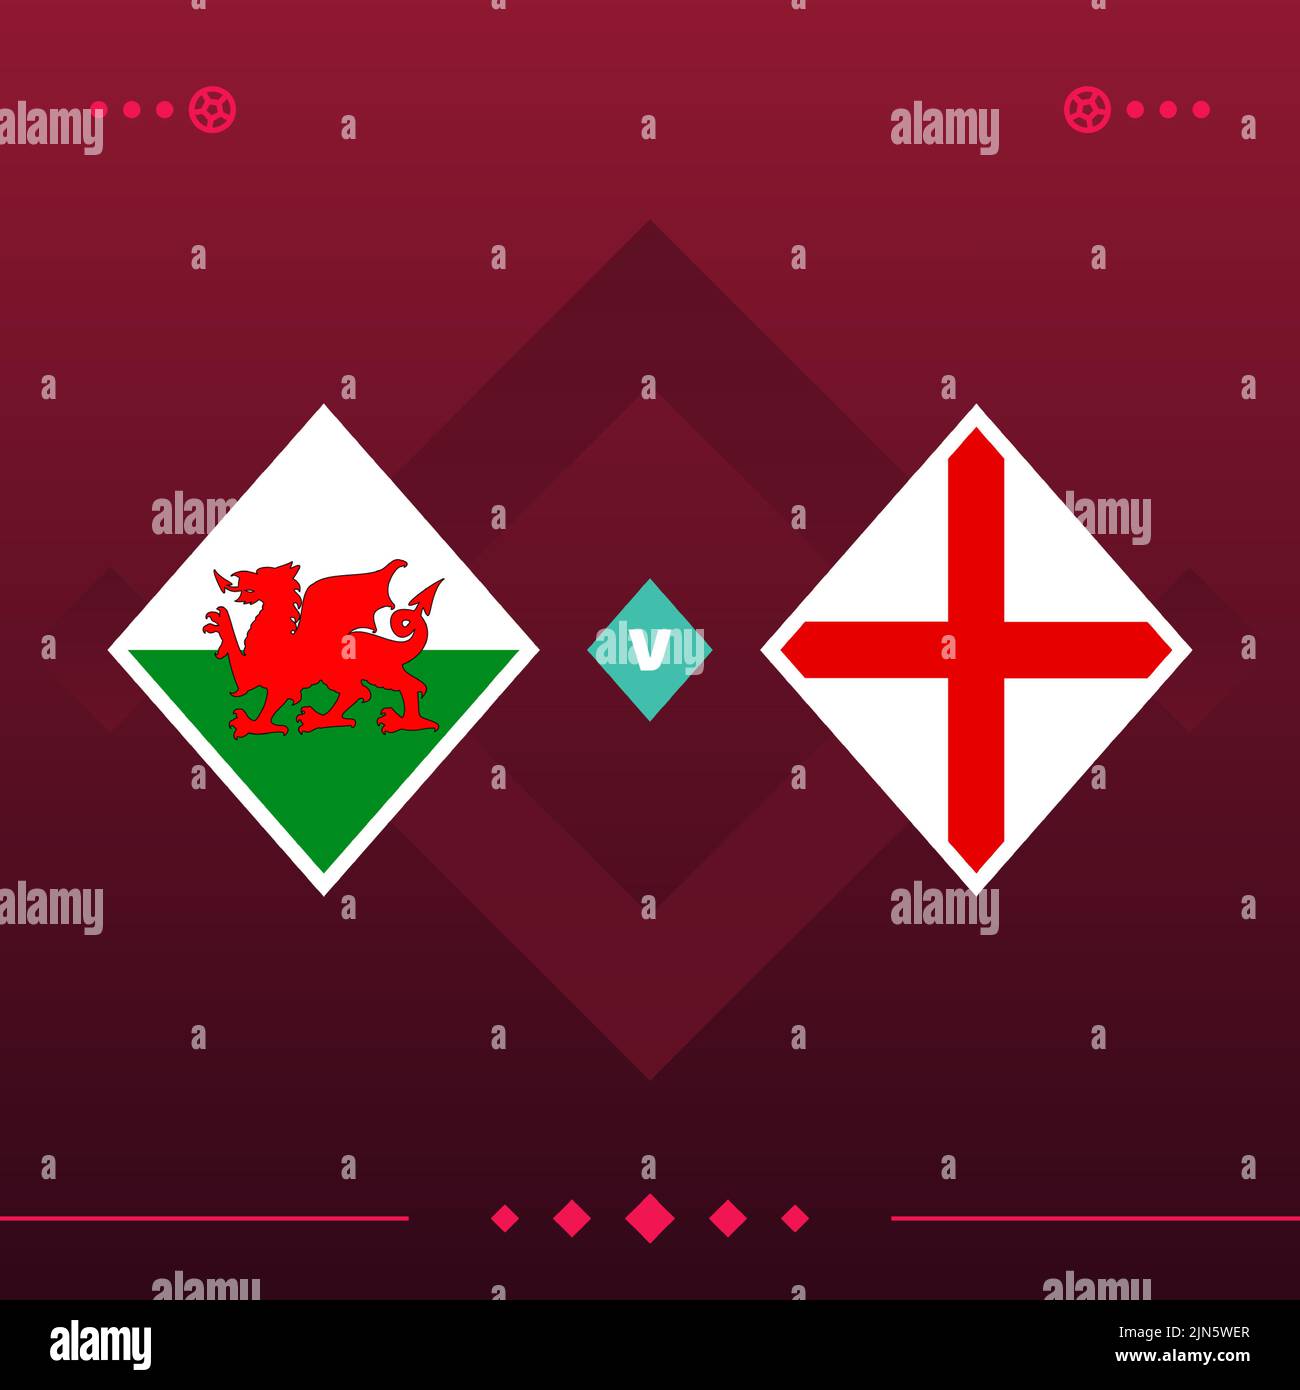 wales, england world football 2022 match versus on red background. vector illustration. Stock Vector